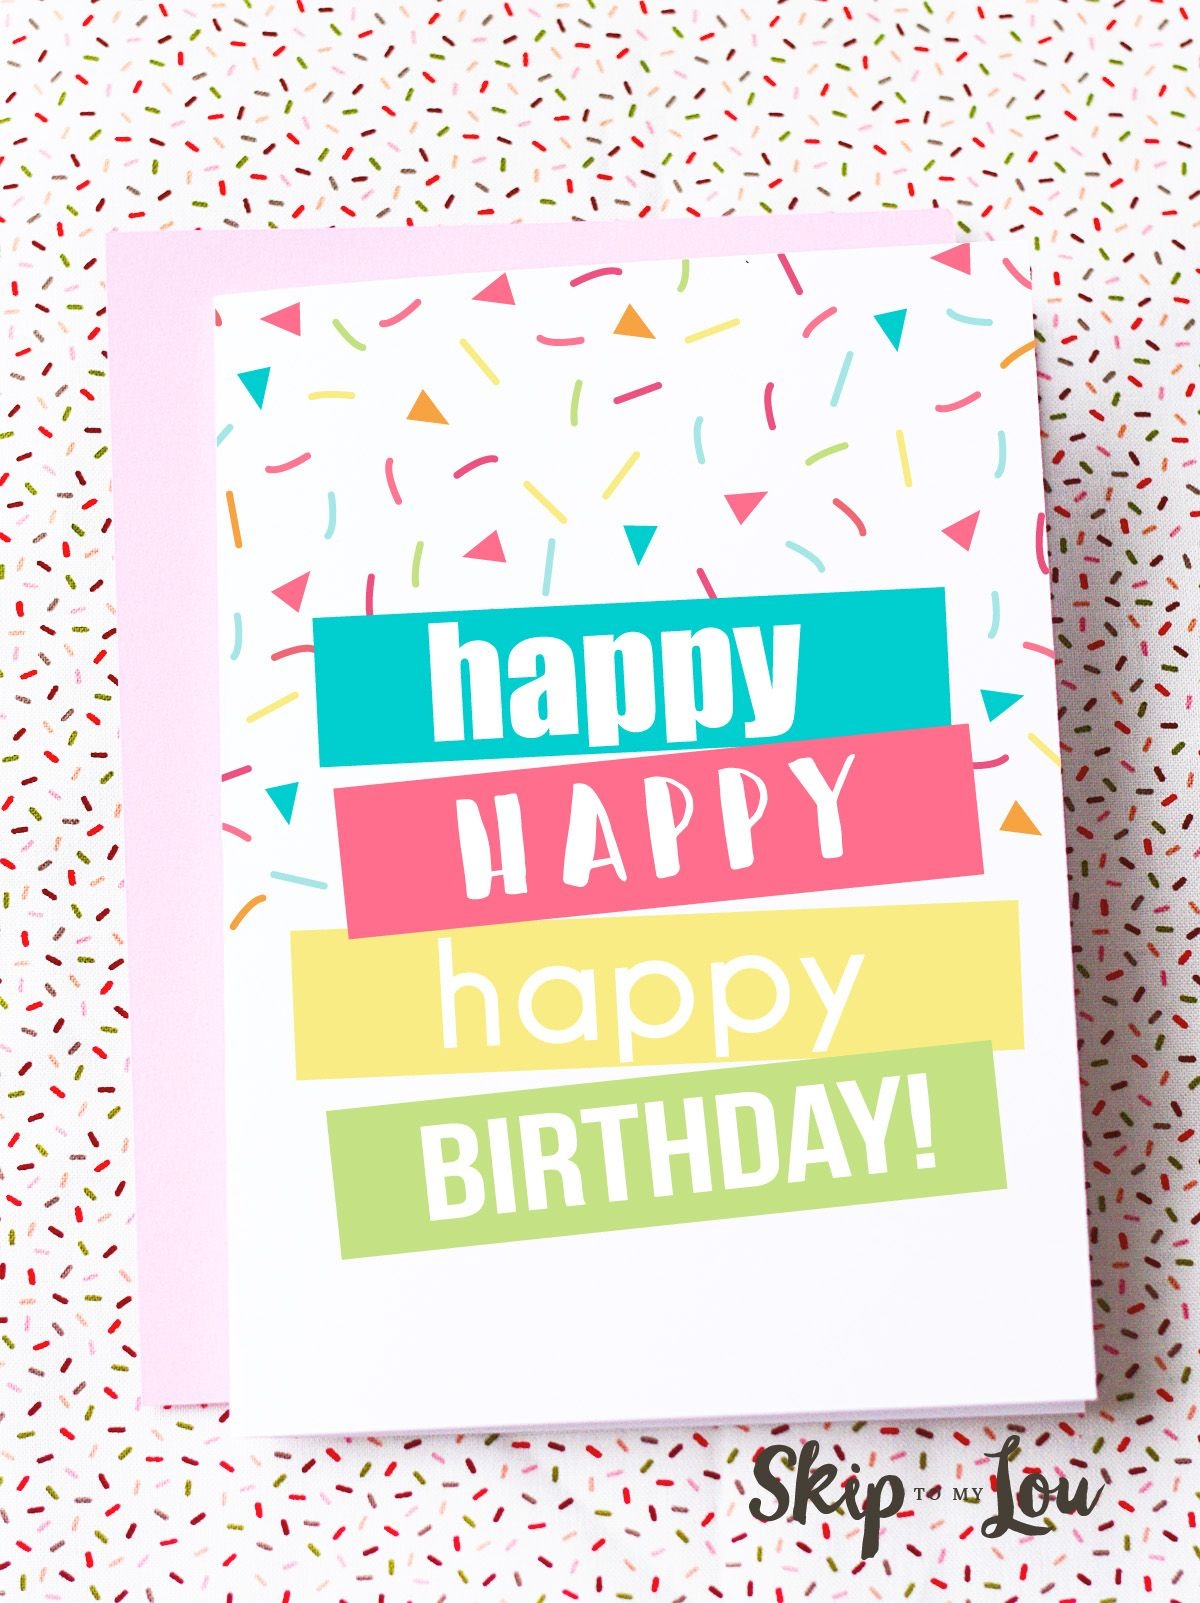 Free Printable Birthday Cards | Best Of Pinterest | Free Printable - Free Printable Birthday Cards For Adults